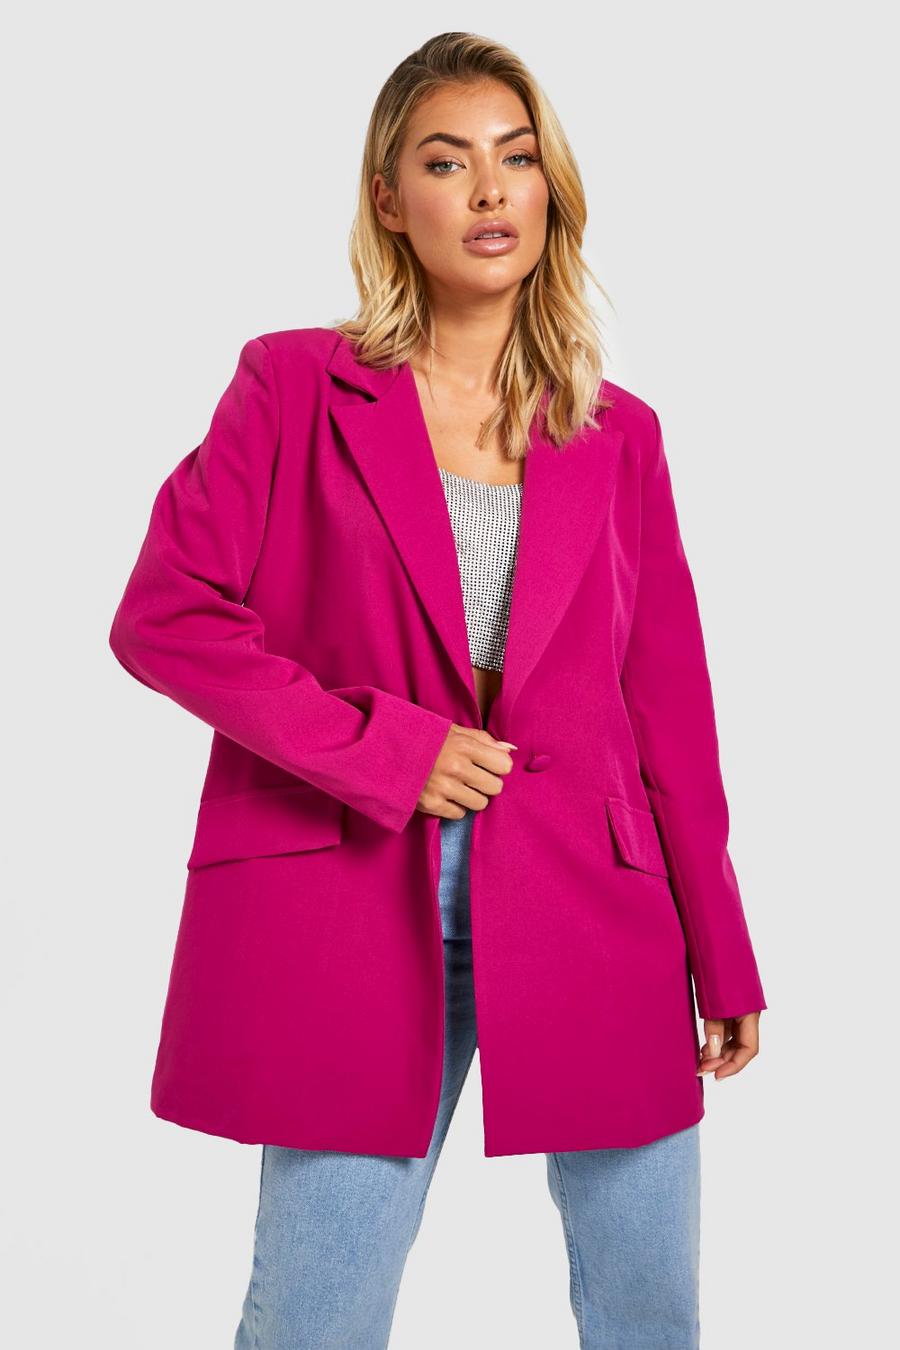 Magenta pink Color Pop Relaxed Fit Tailored Blazer